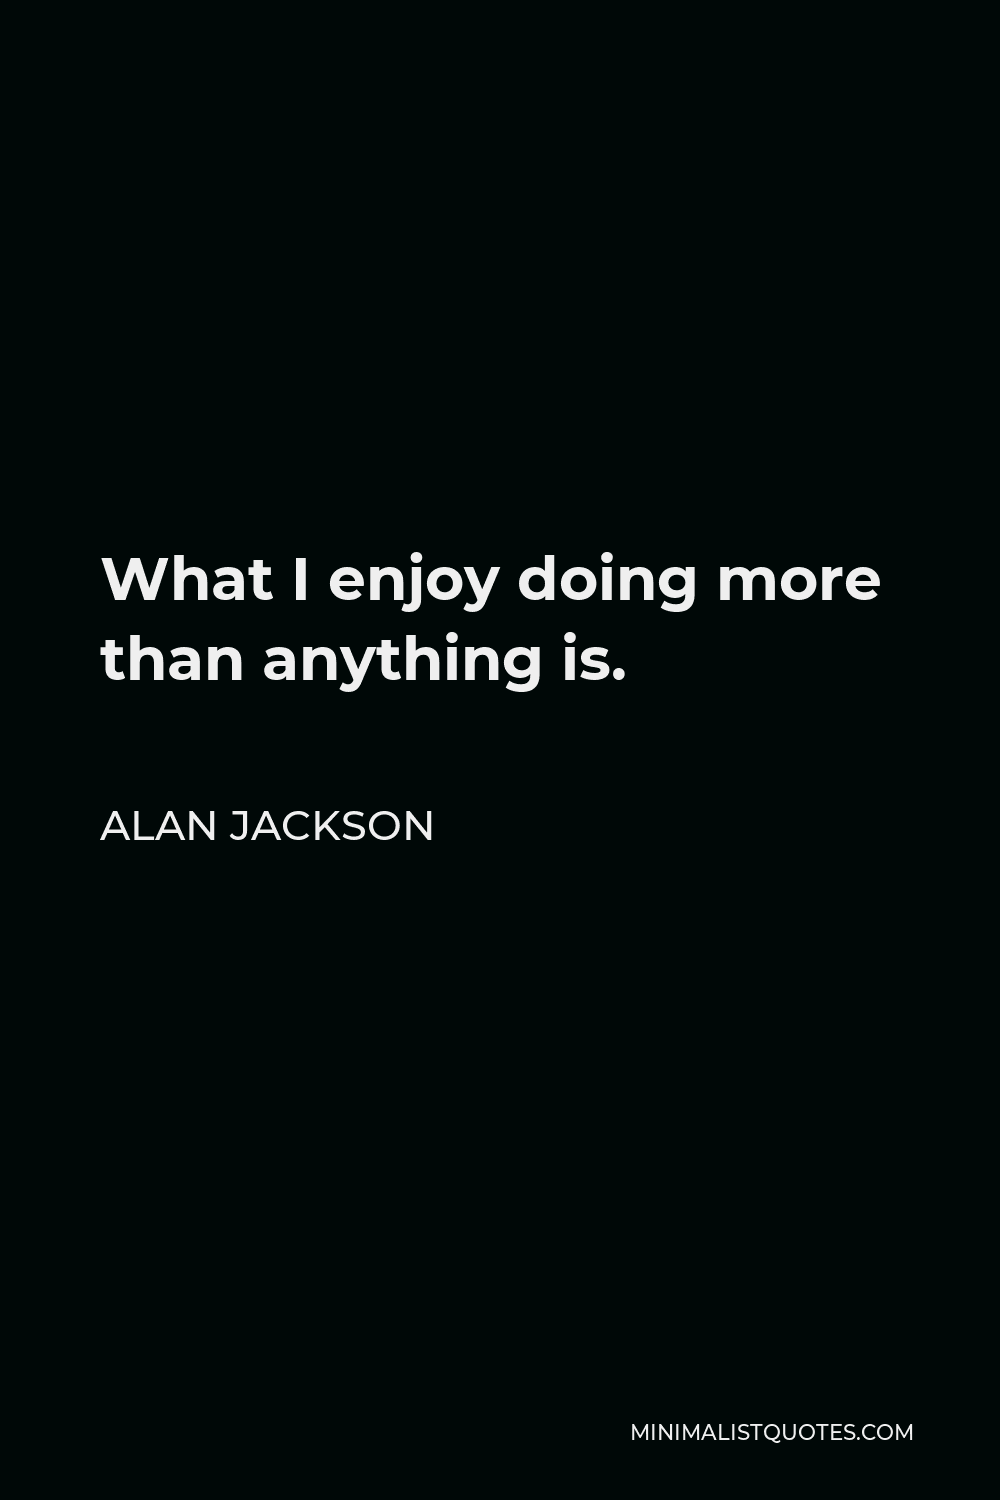 Alan Jackson Quote - What I enjoy doing more than anything is.